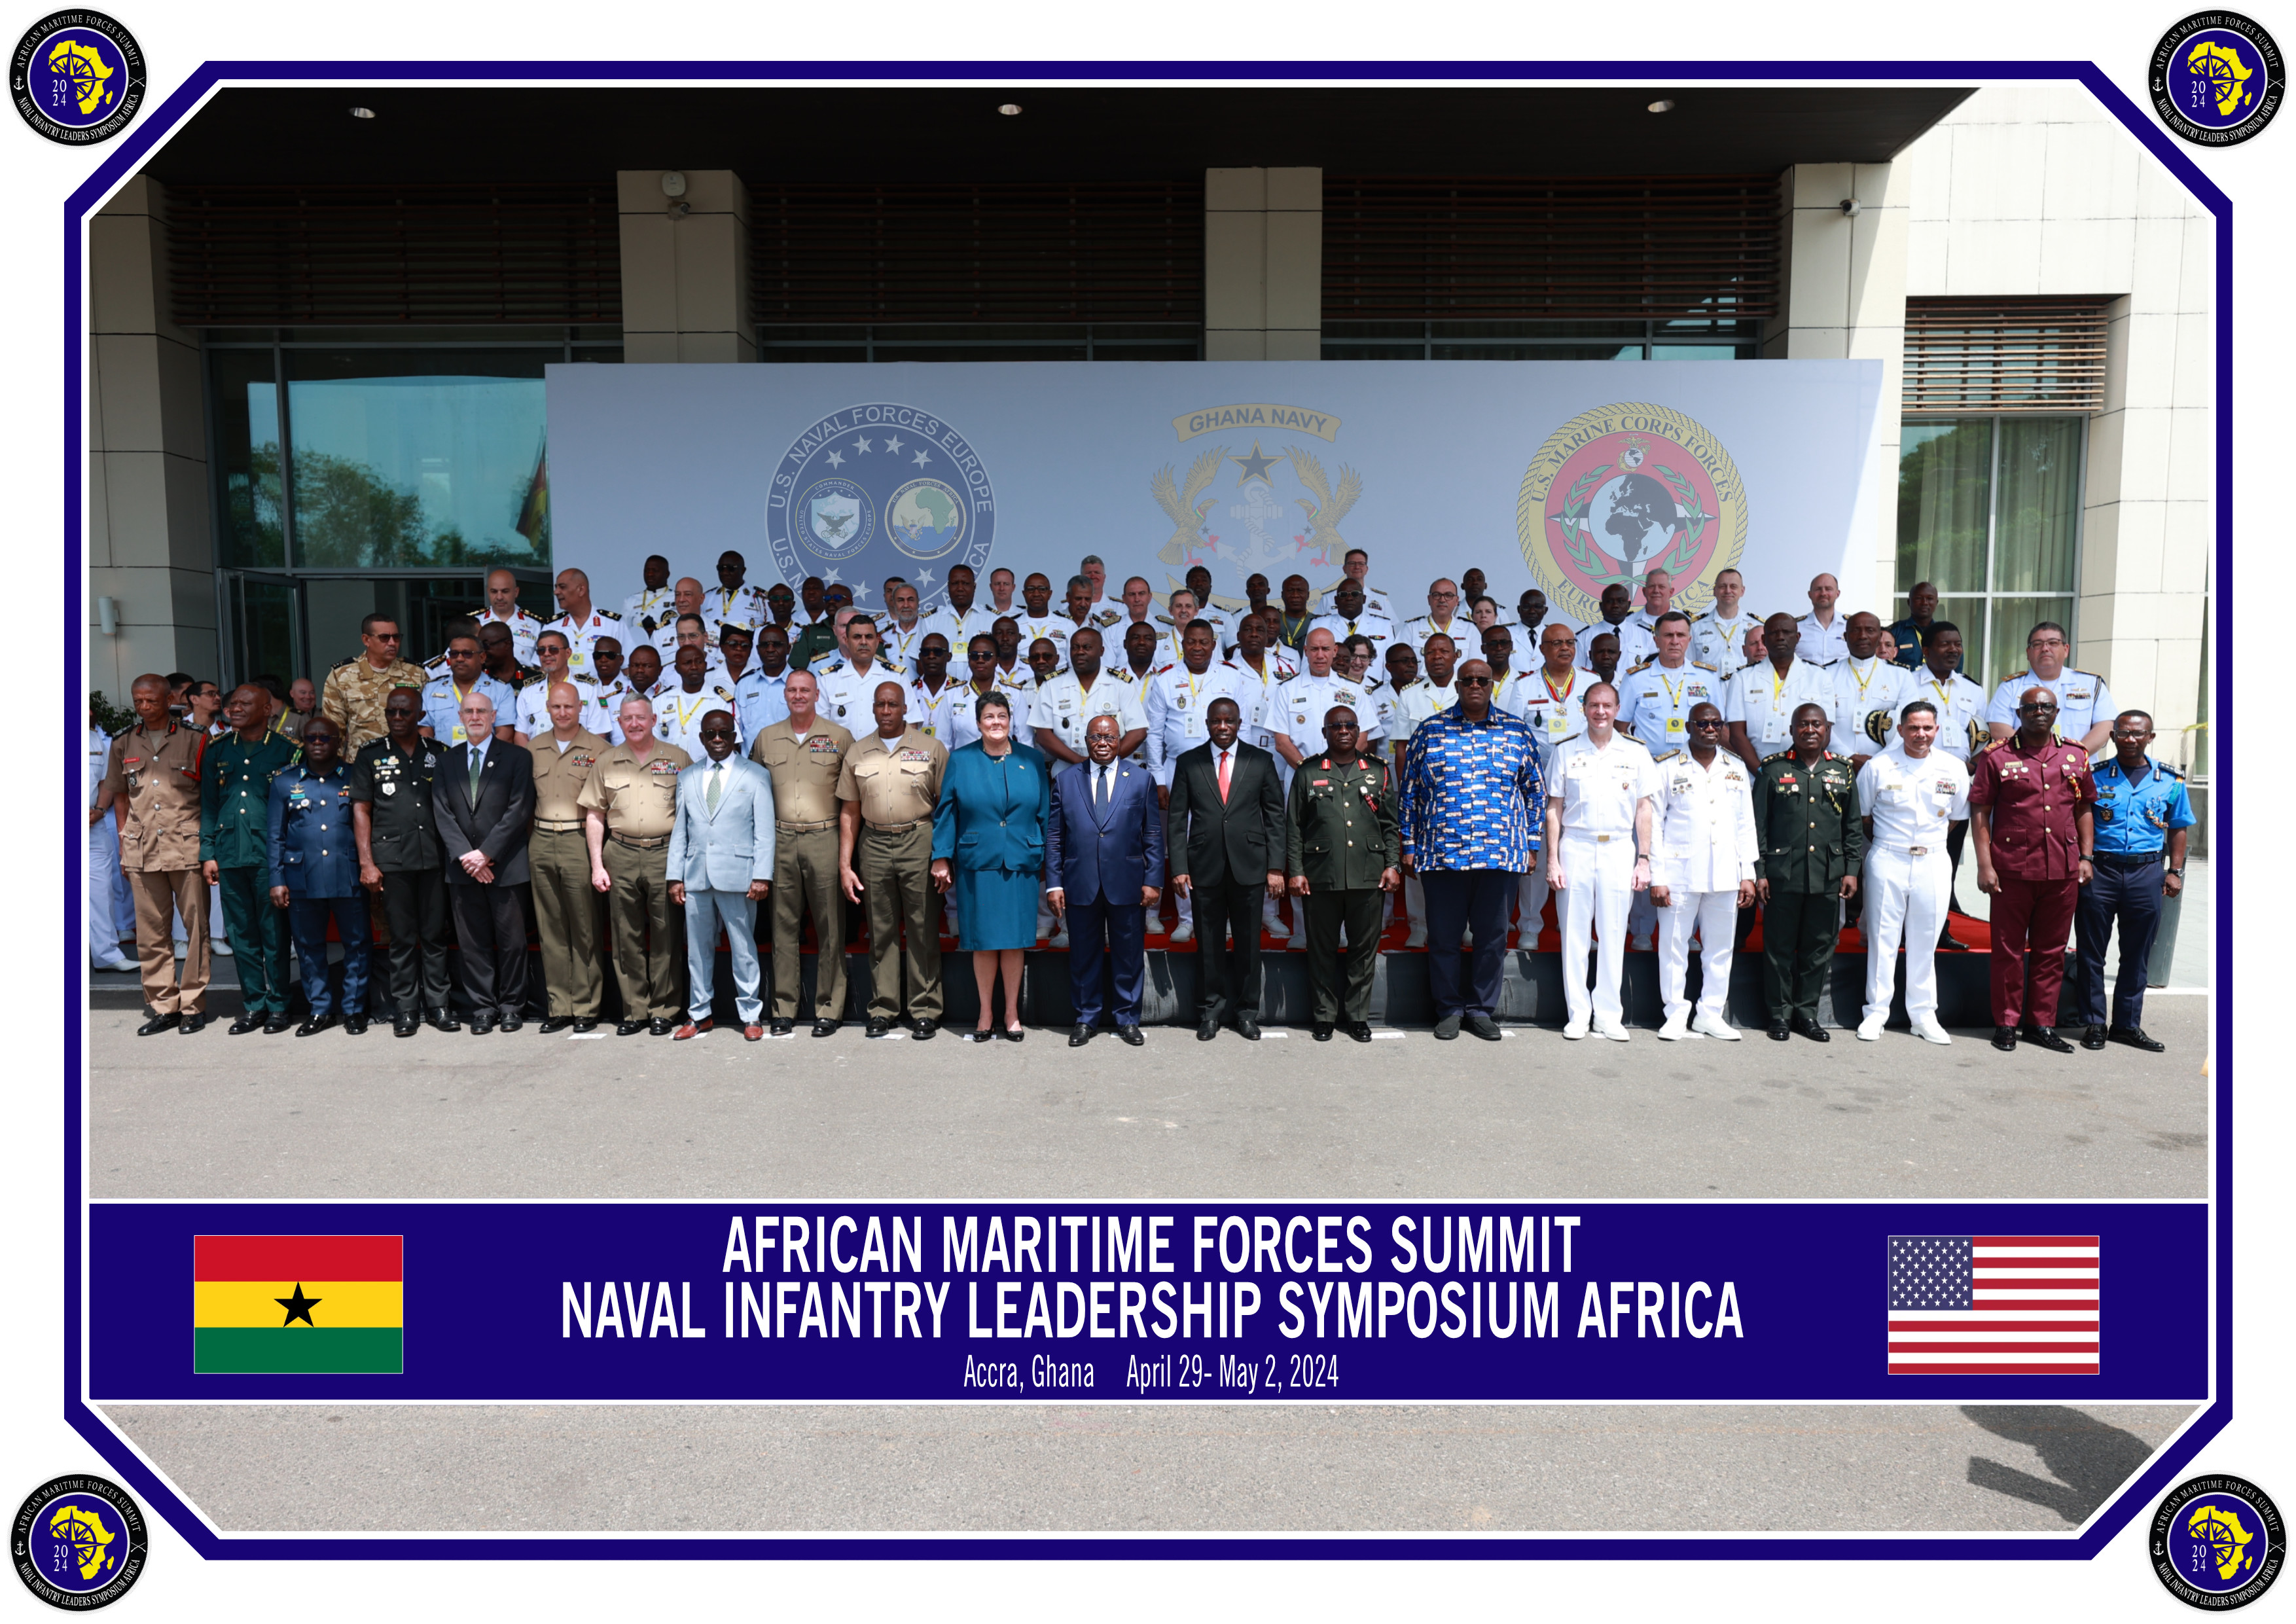 Attendees of the African Maritime Forces Summit and Naval Infantry Leadership Symposium - Africa (AMFS/NILS-A) 2024 pose for a group photo in Accra, Ghana, on April 30, 2024. AMFS/NILS-A is a multinational, Africa-focused, strategic-level forum designed to address transnational maritime security challenges in African waters, bringing together partner nations with marine forces and naval infantry to develop interoperability, crisis response capabilities, and foster relationships that will improve Africa's maritime domain security. (U.S. Marine Corps photo illustration by Cpl. Addysyn Tobar)